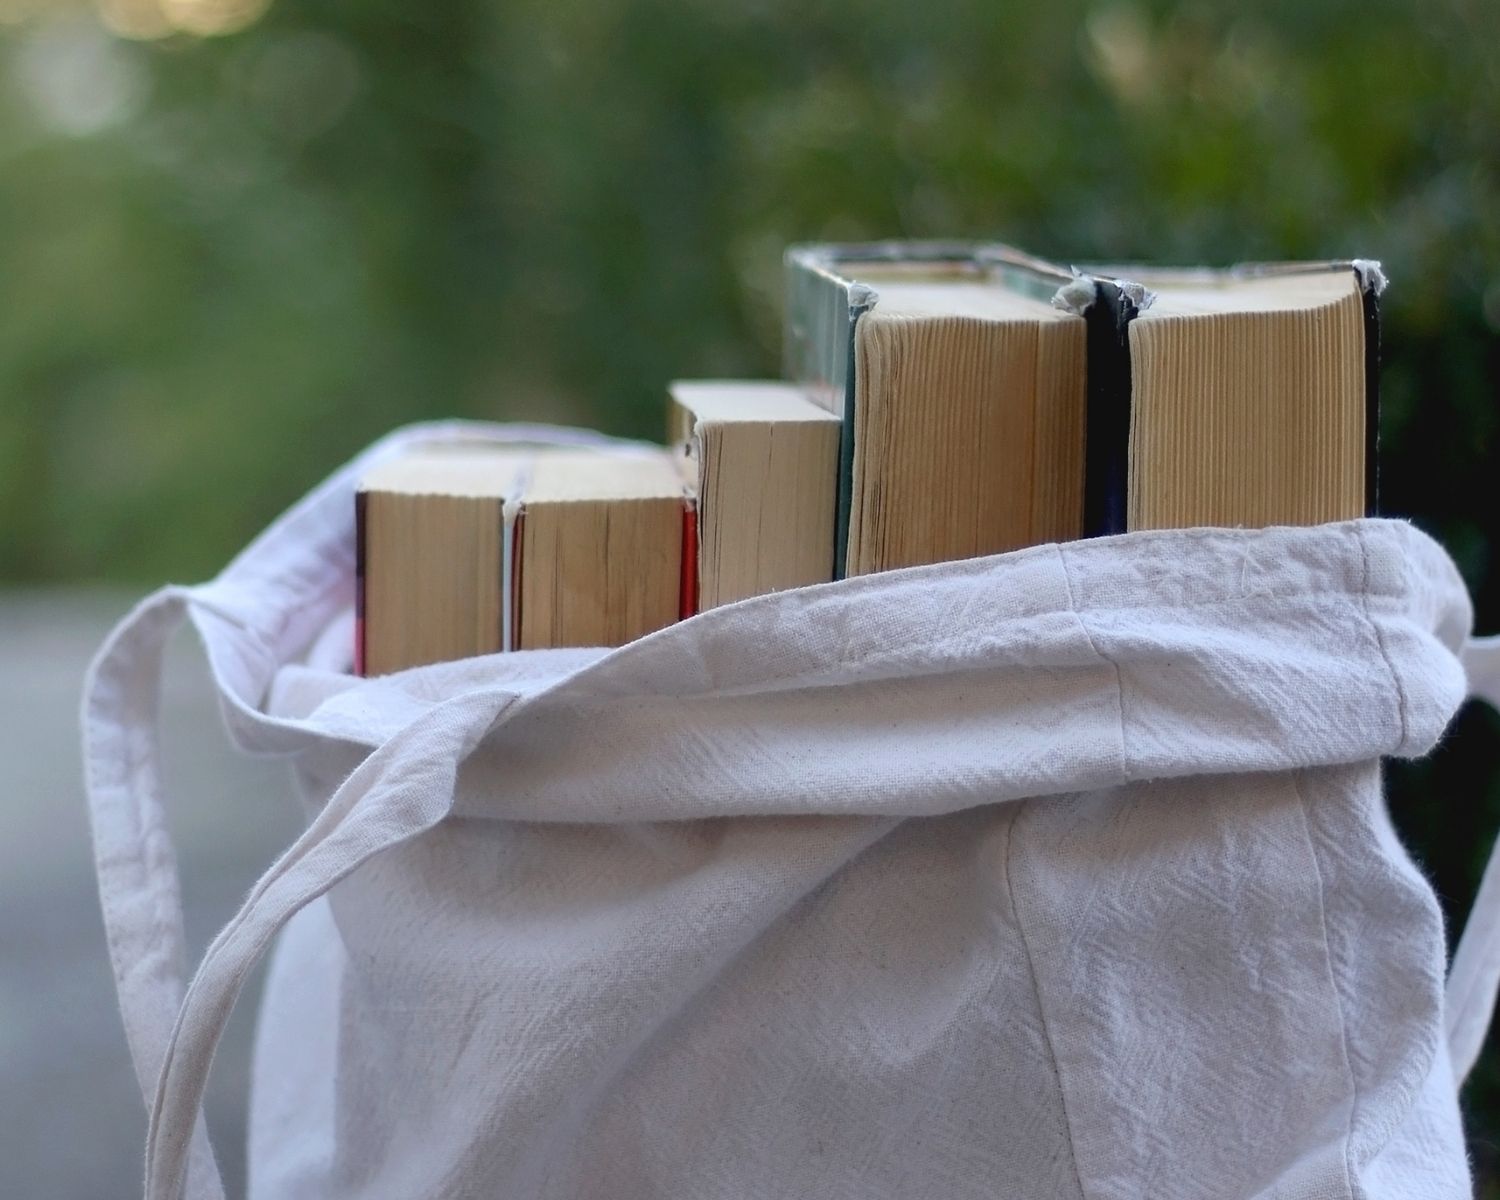 Five books in a cotton bag against a background of greenery